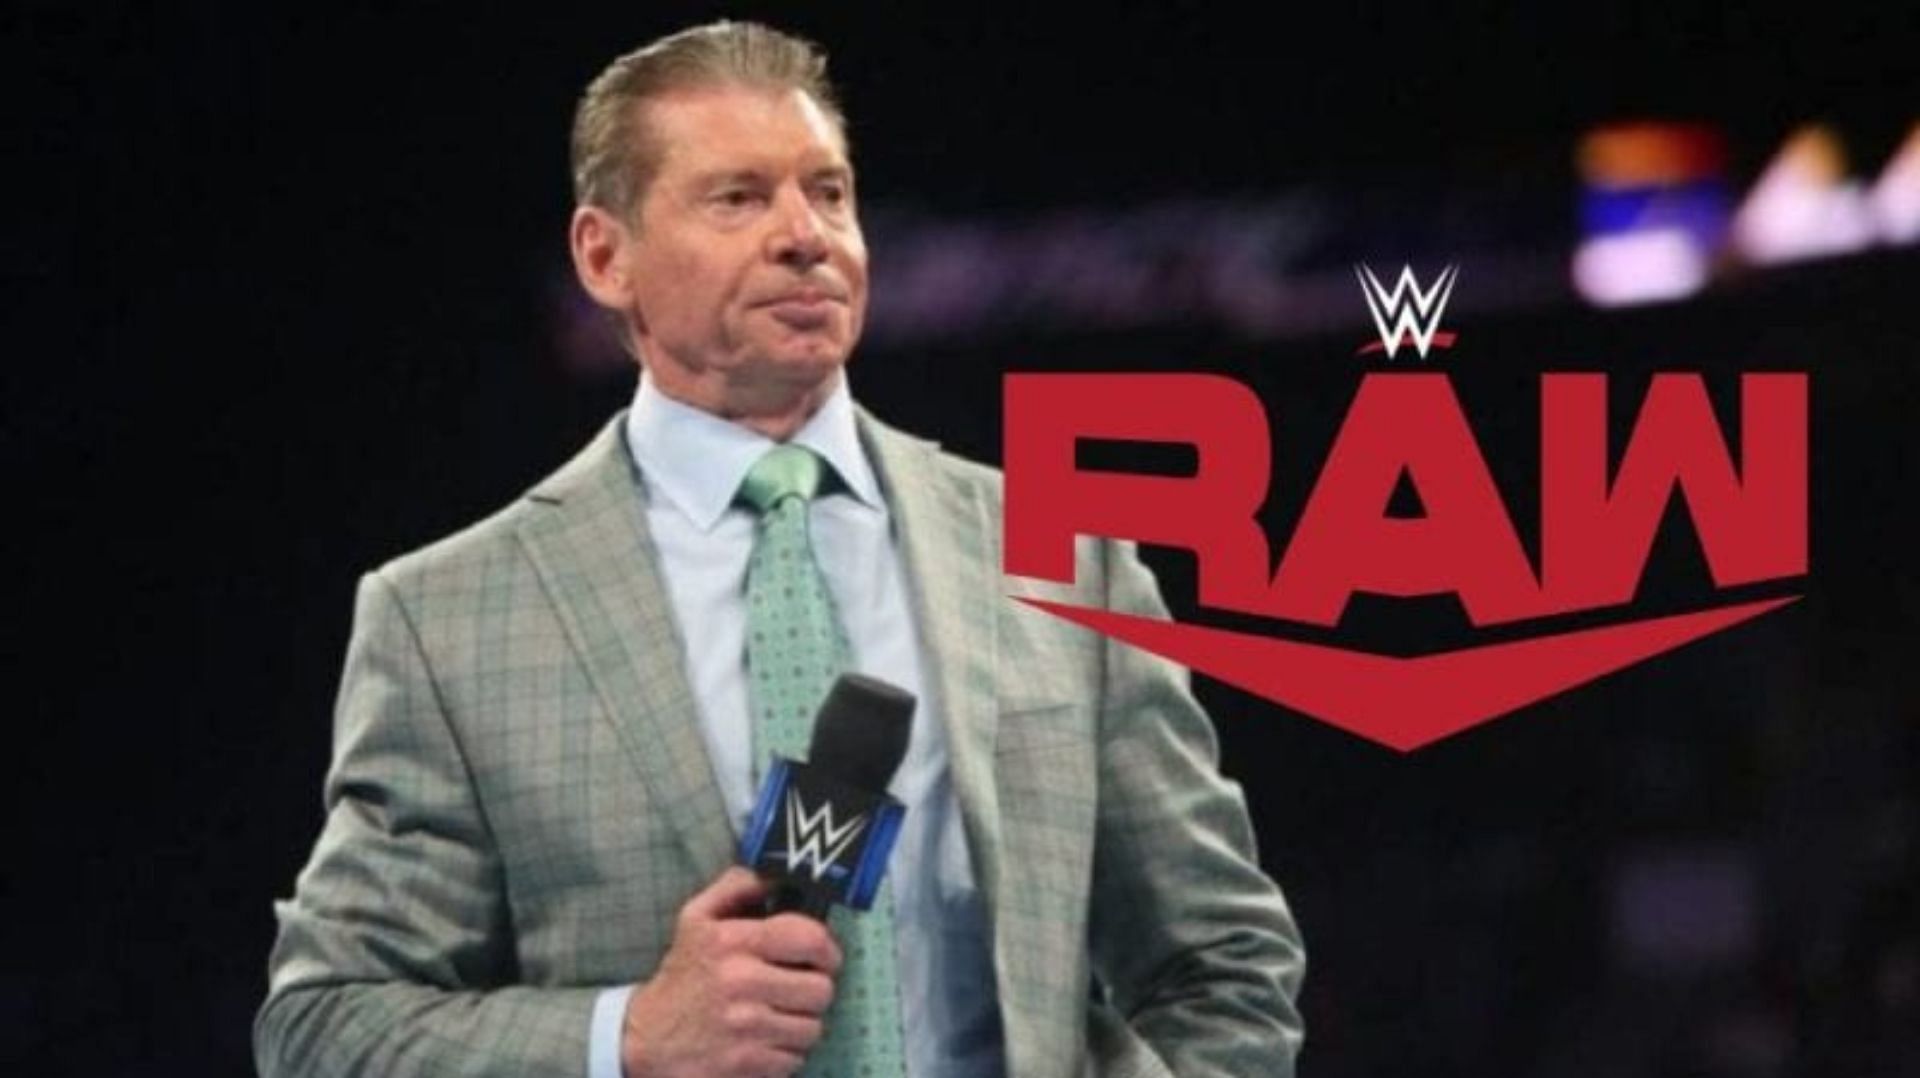 Vince McMahon has taken many outlandish bumps over the years.